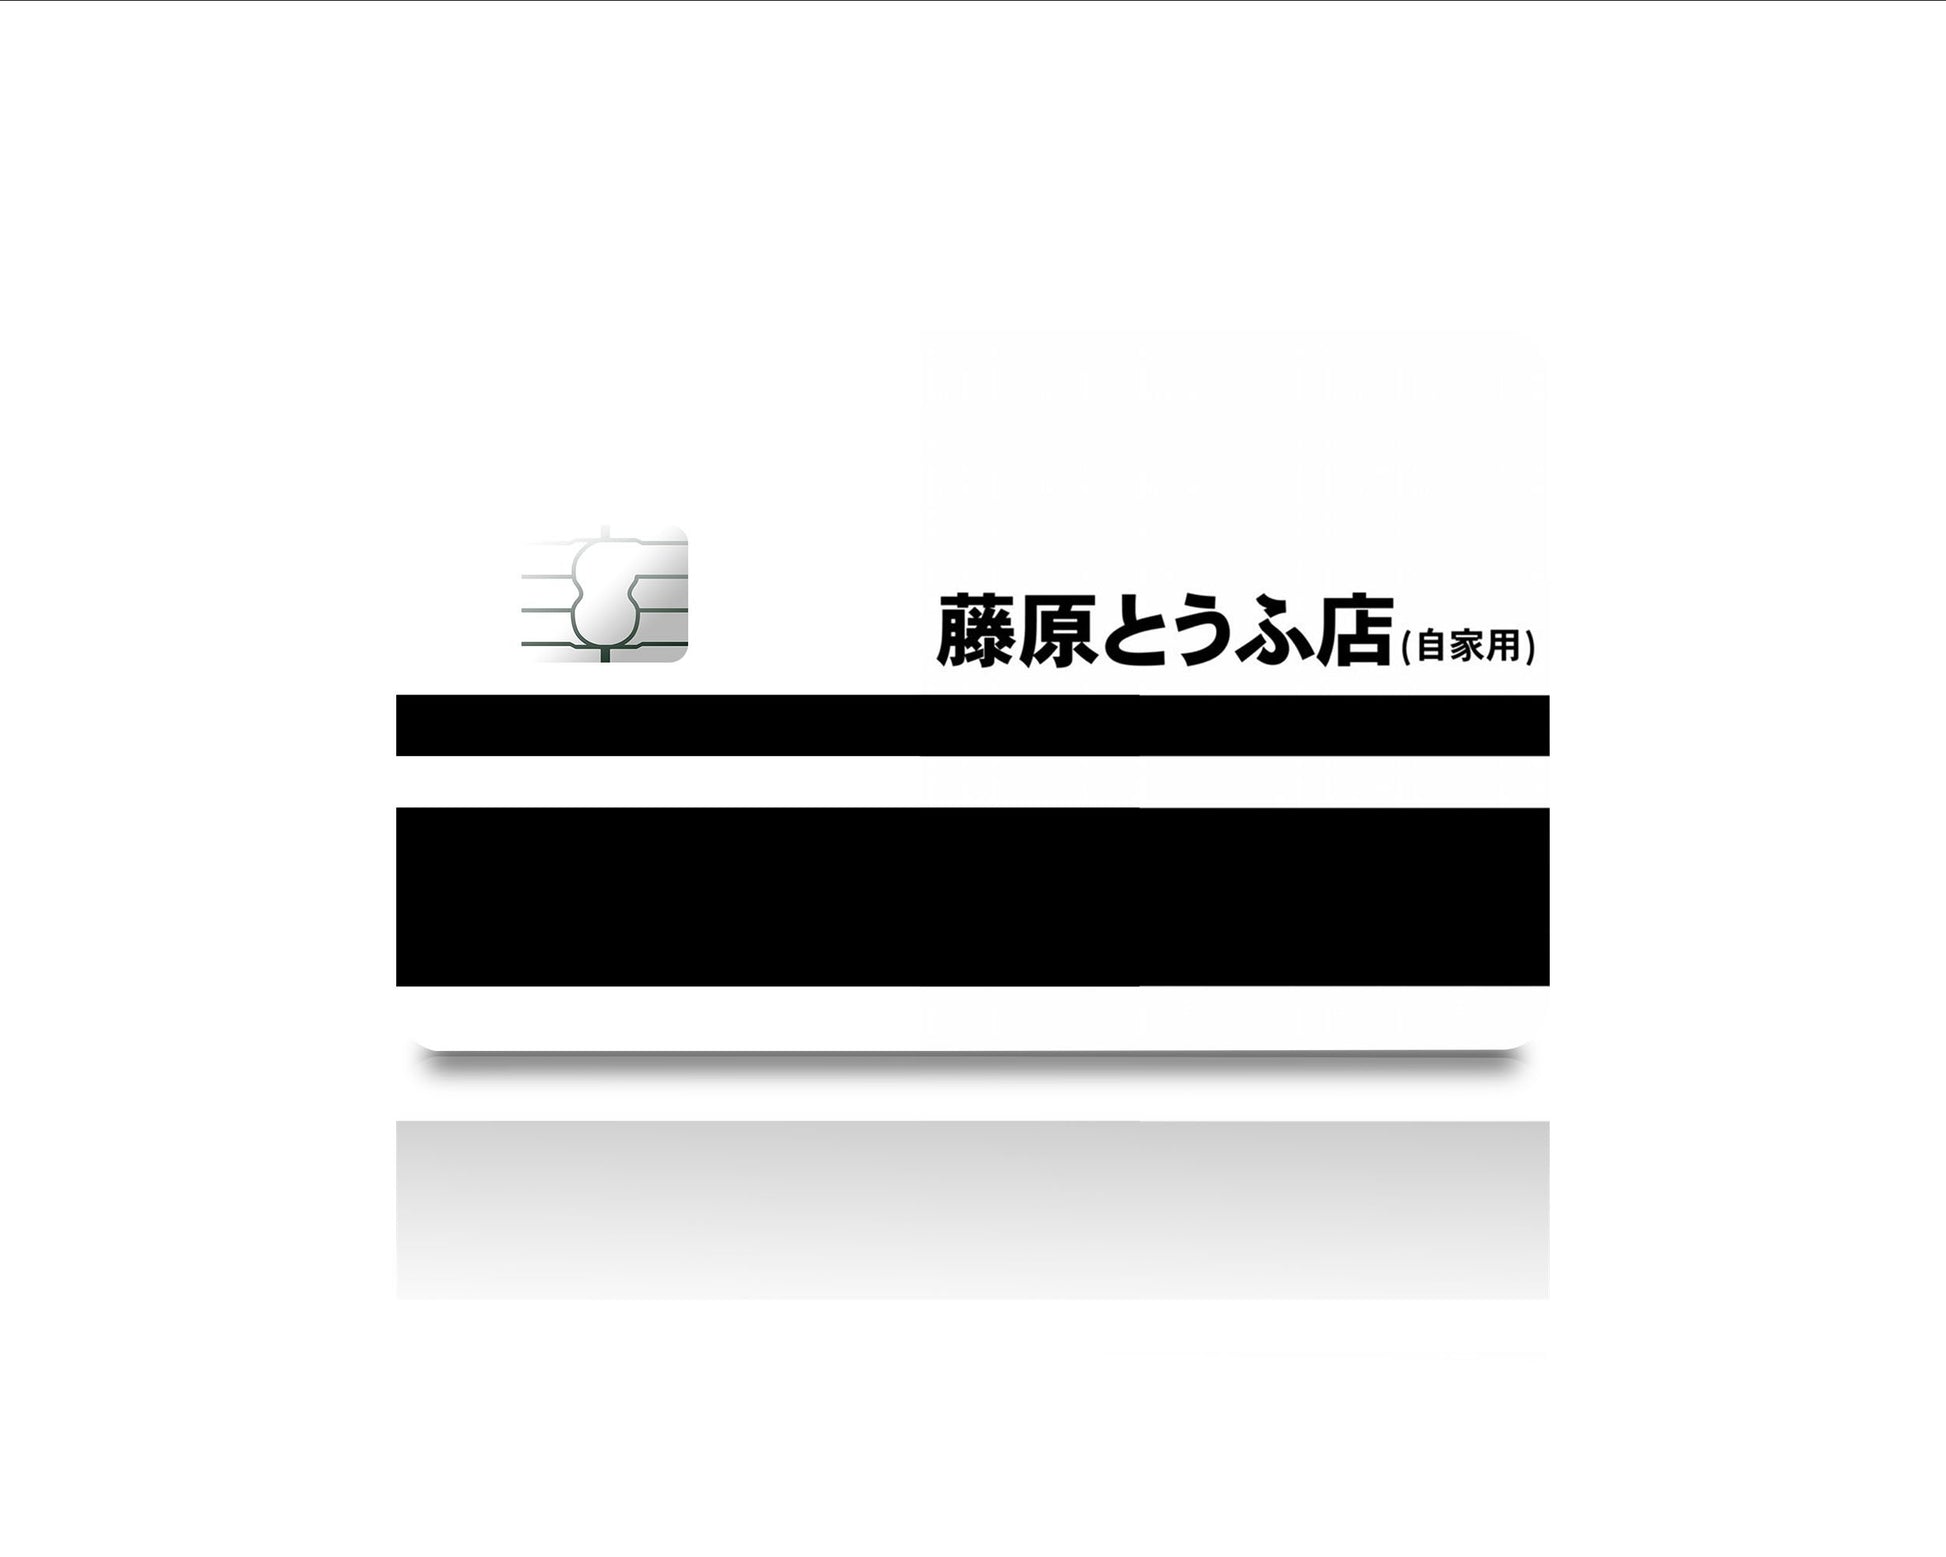 Logo Initial D Credit Card Skin - Wrapime - Anime Skins and Styles